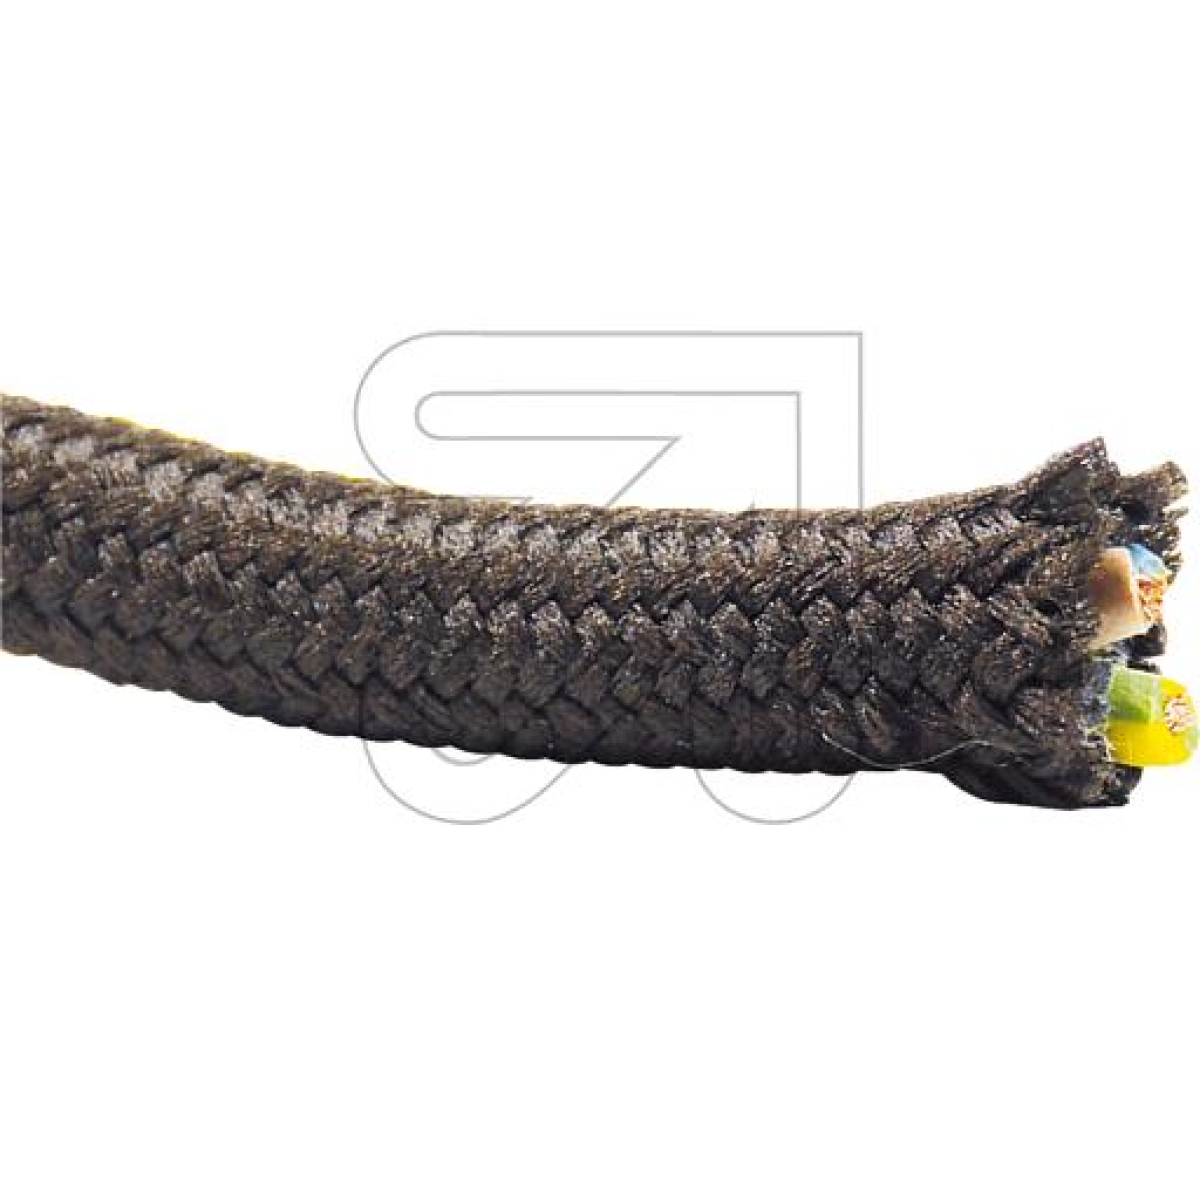 EGBTextile sheathed cable 3-Liy-Uf 3x0.75 brownArticle-No: 362820